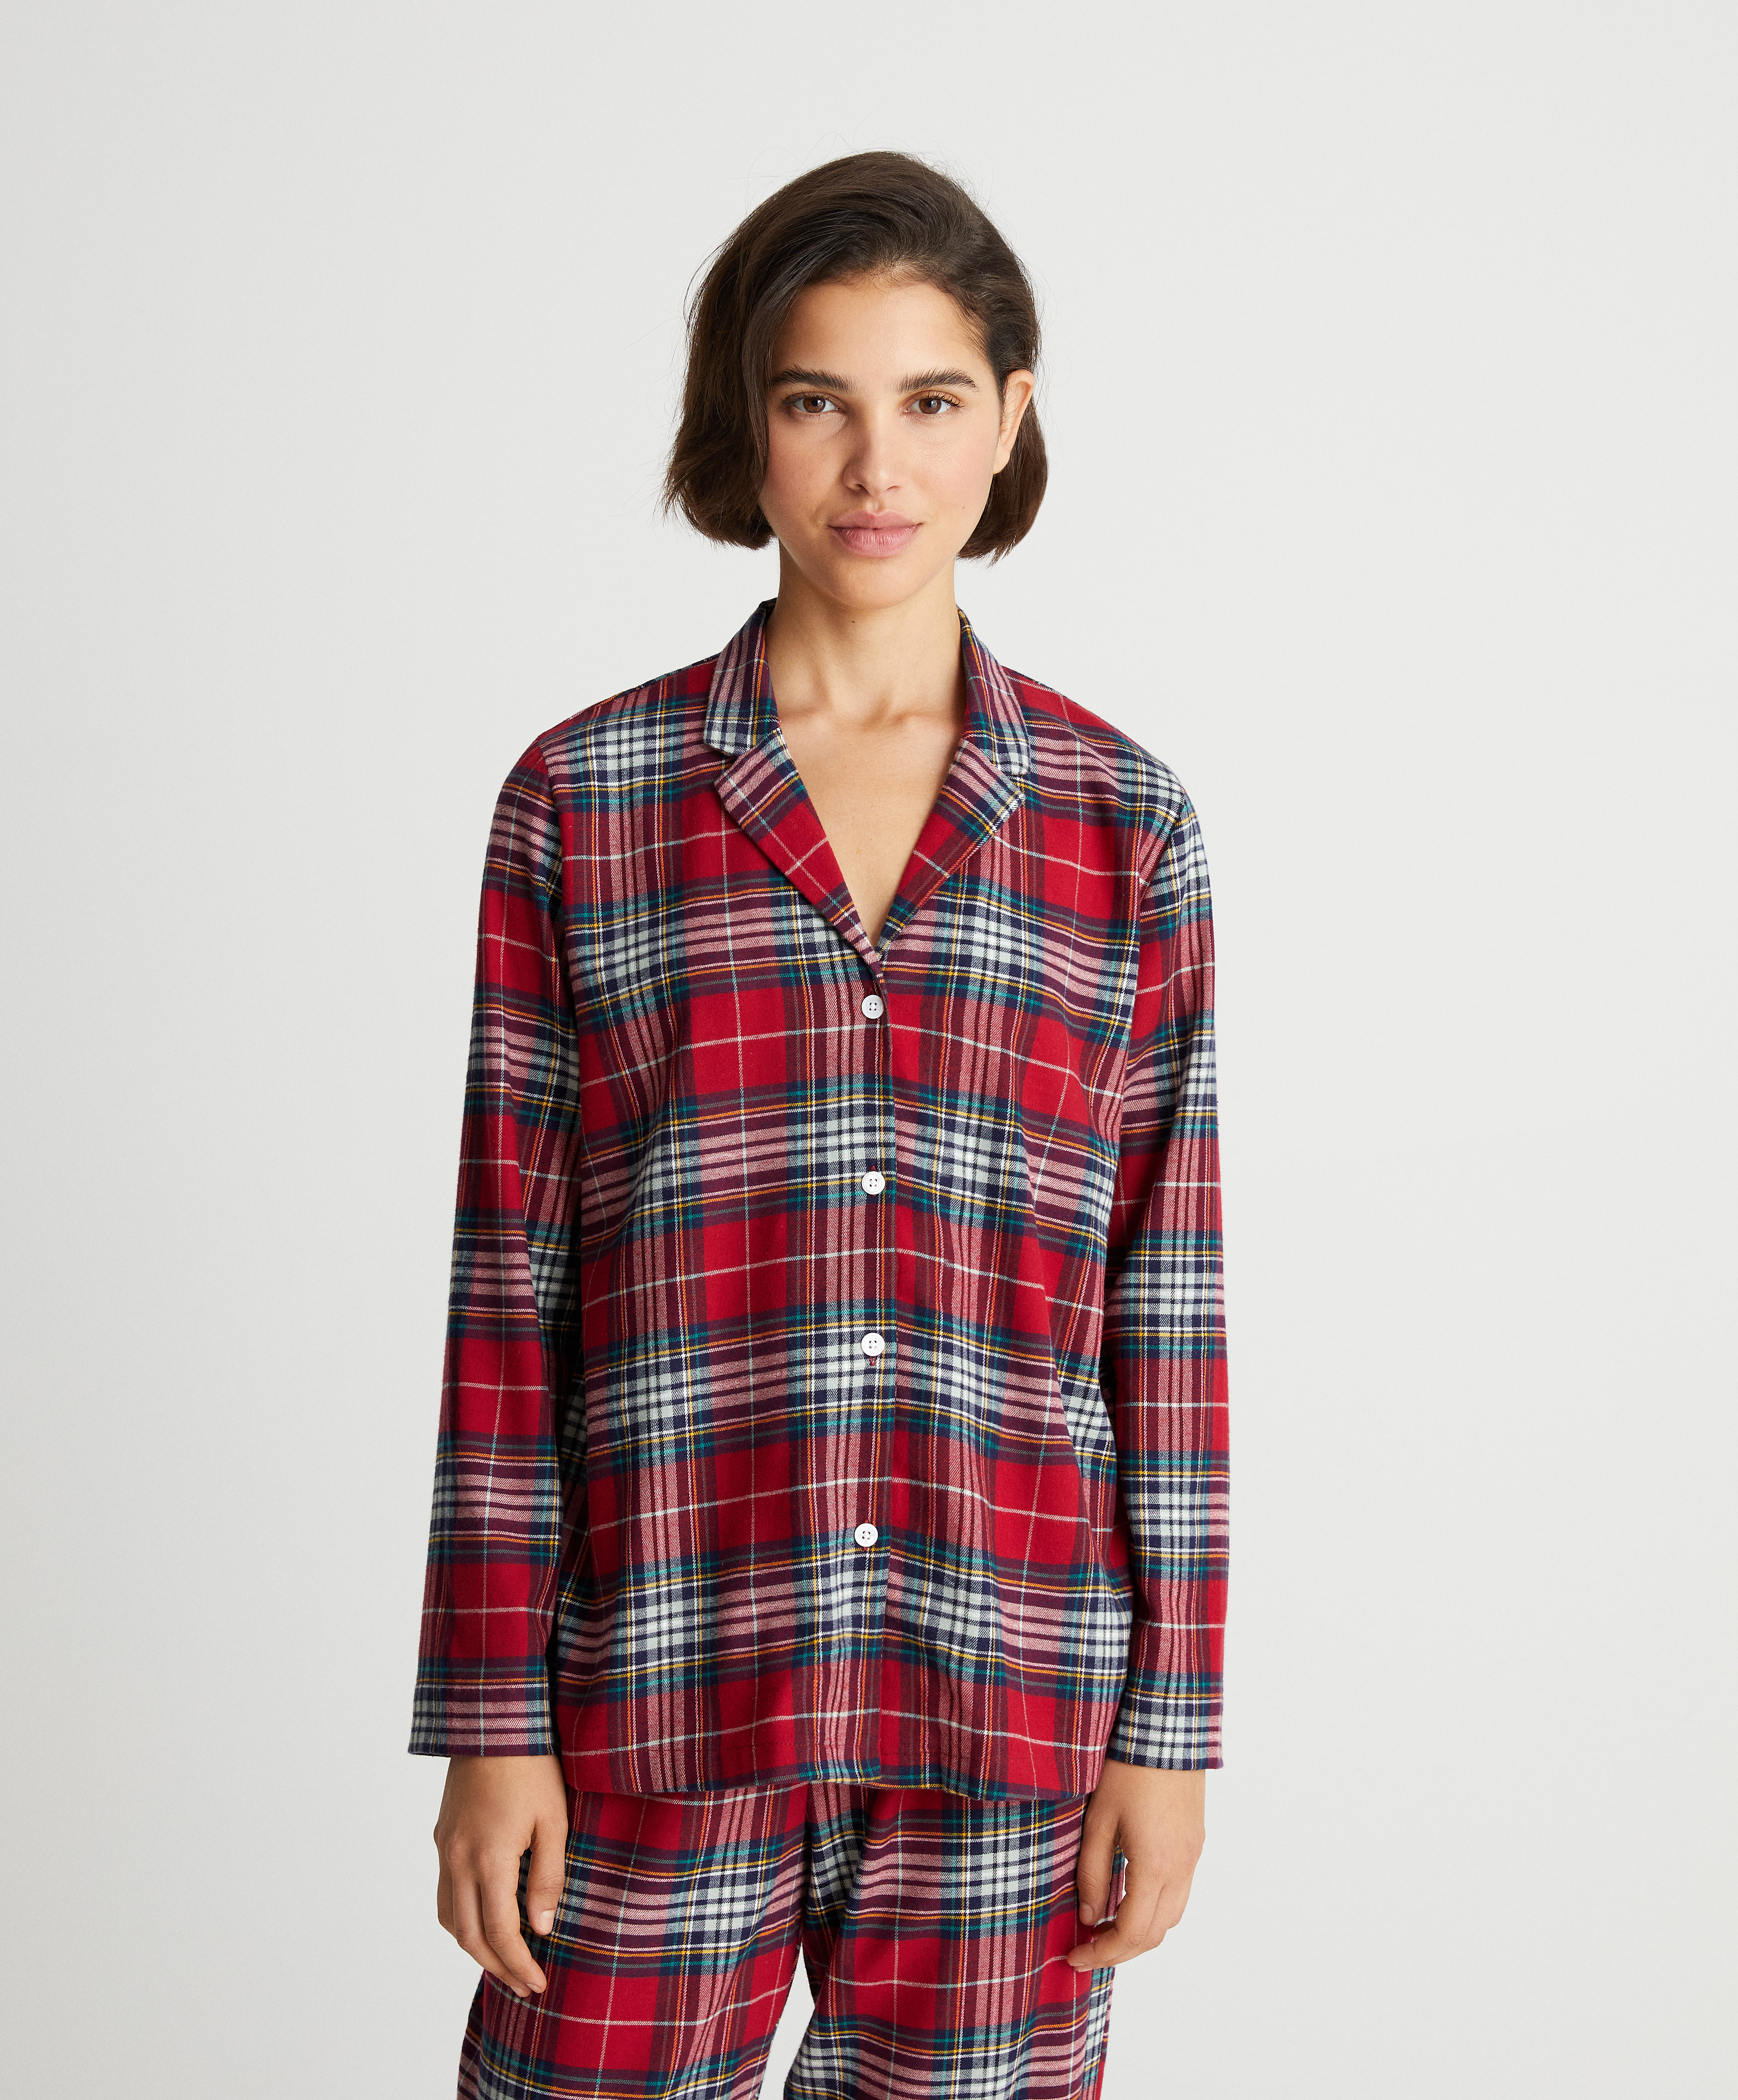 Stretch cotton check shirt with long sleeves